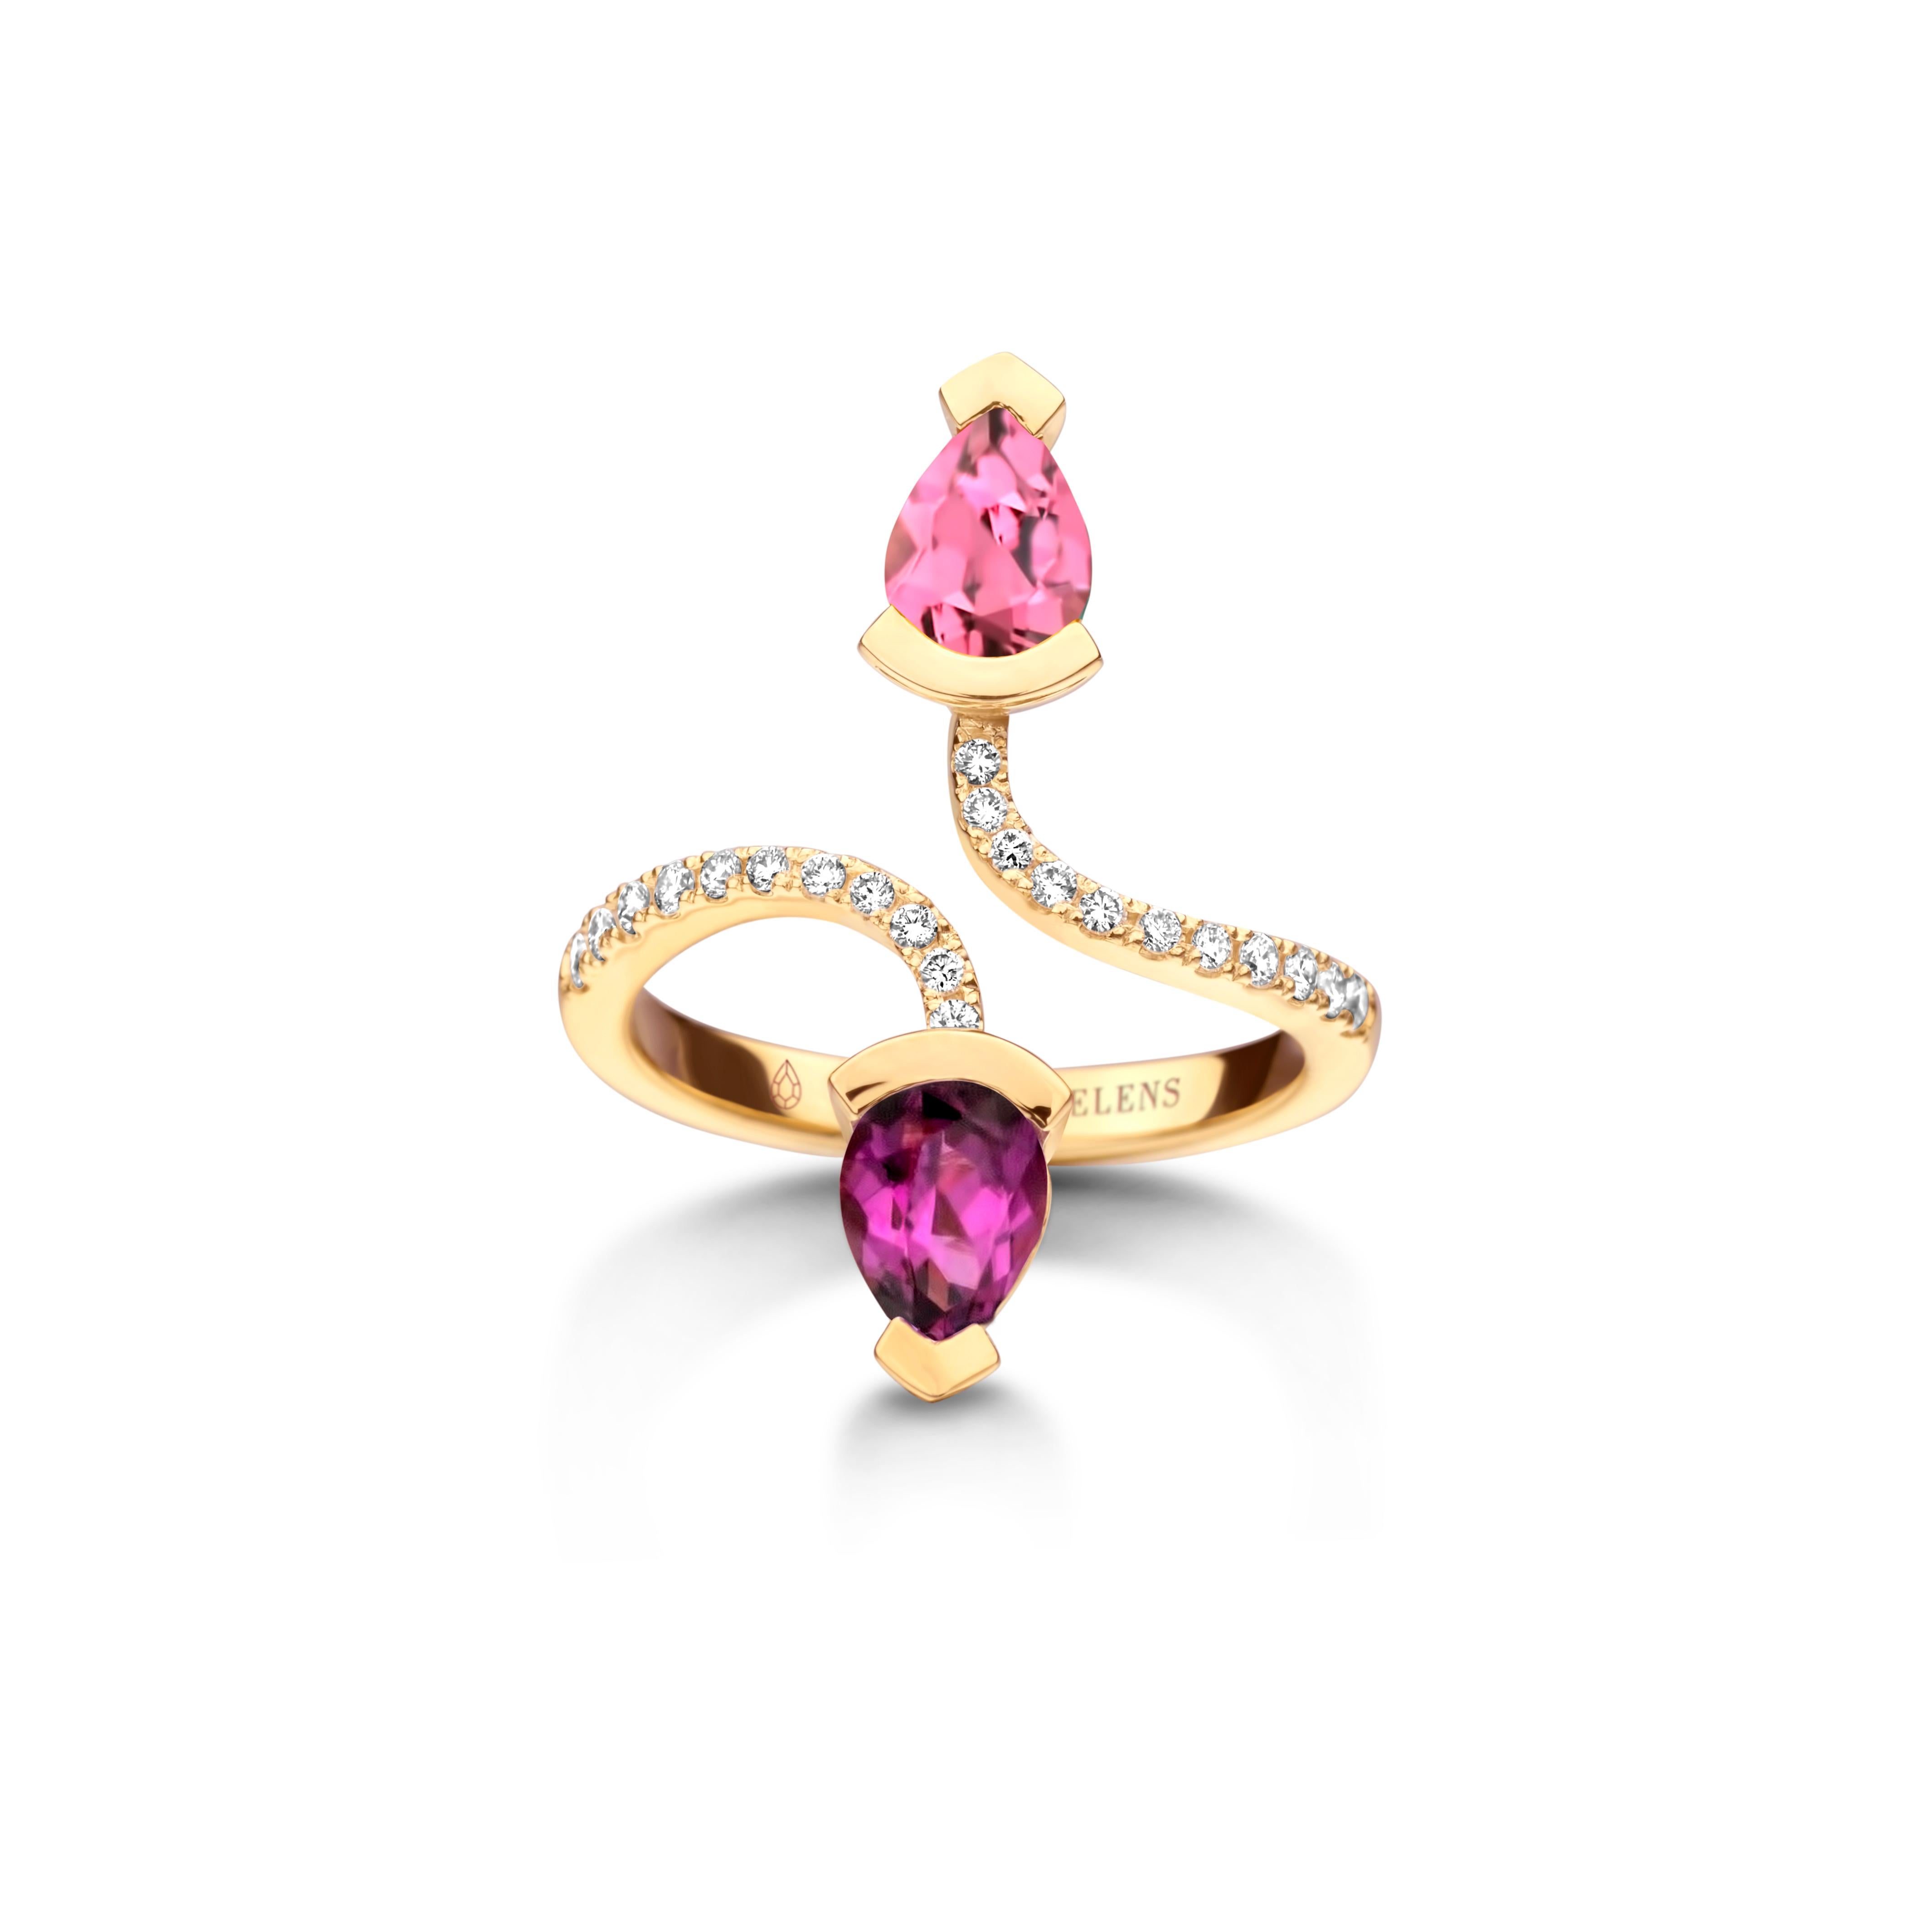 Adeline Duo ring in 18Kt white gold 5g set with a pear-shaped pink tourmaline 0,70 Ct, a pear-shaped royal purple garnet 0,70 Ct and 0,19 Ct of white brilliant cut diamonds - VS F quality. Celine Roelens, a goldsmith and gemologist, is specialized